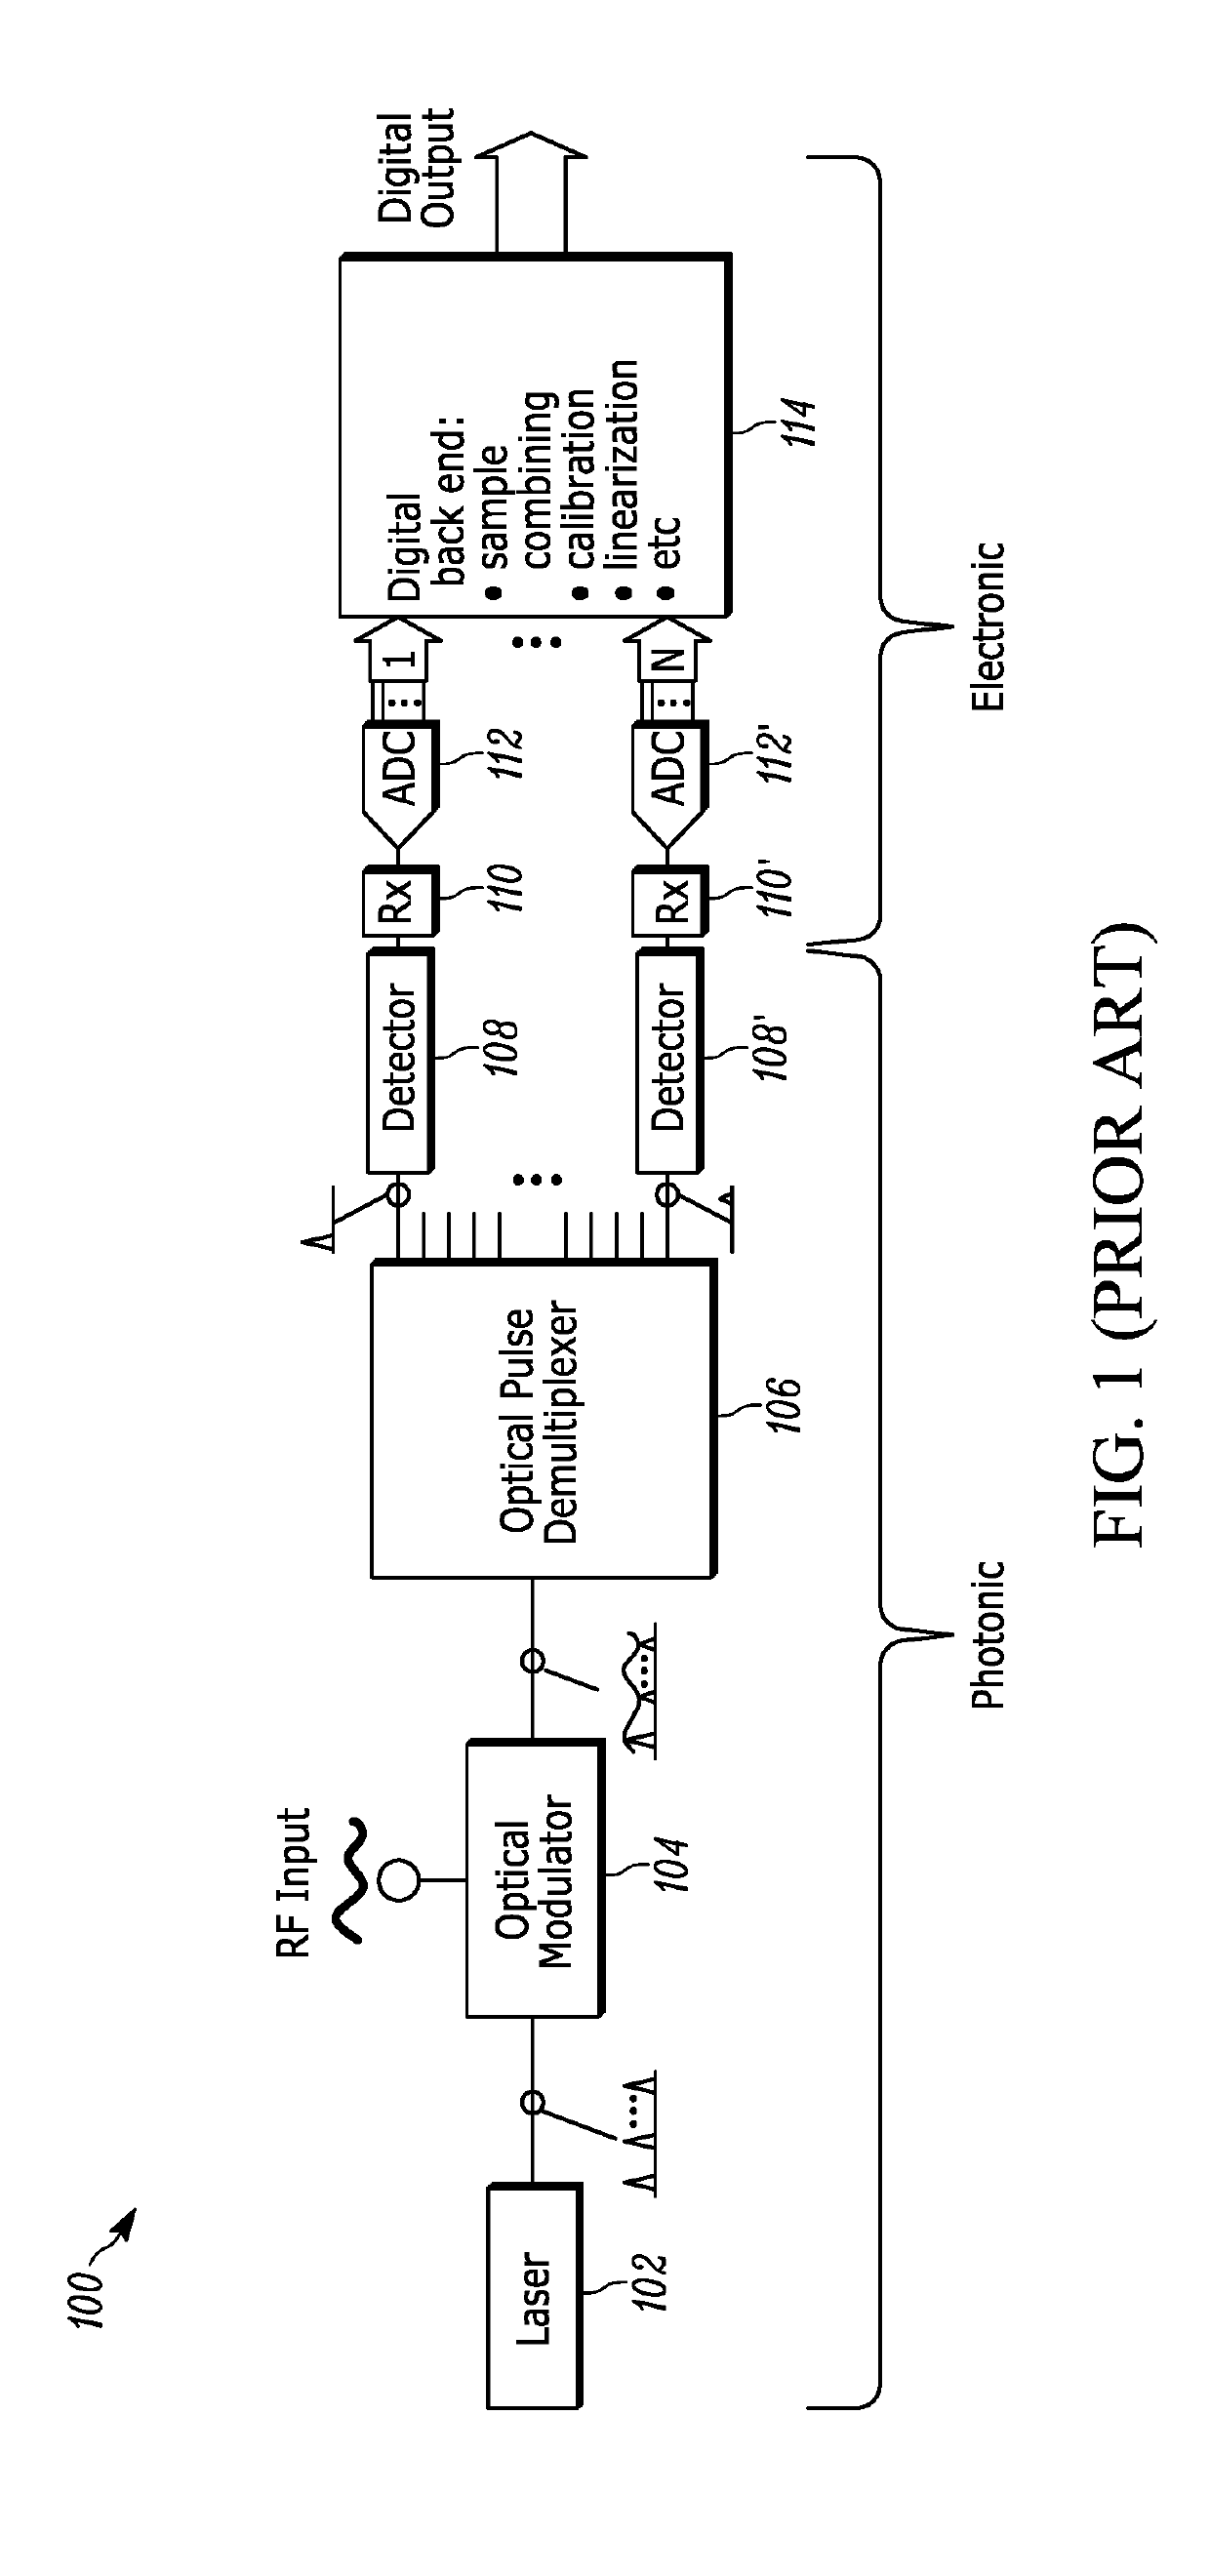 Photonically-Sampled Electronically-Quantized Analog-to-Digital Converter